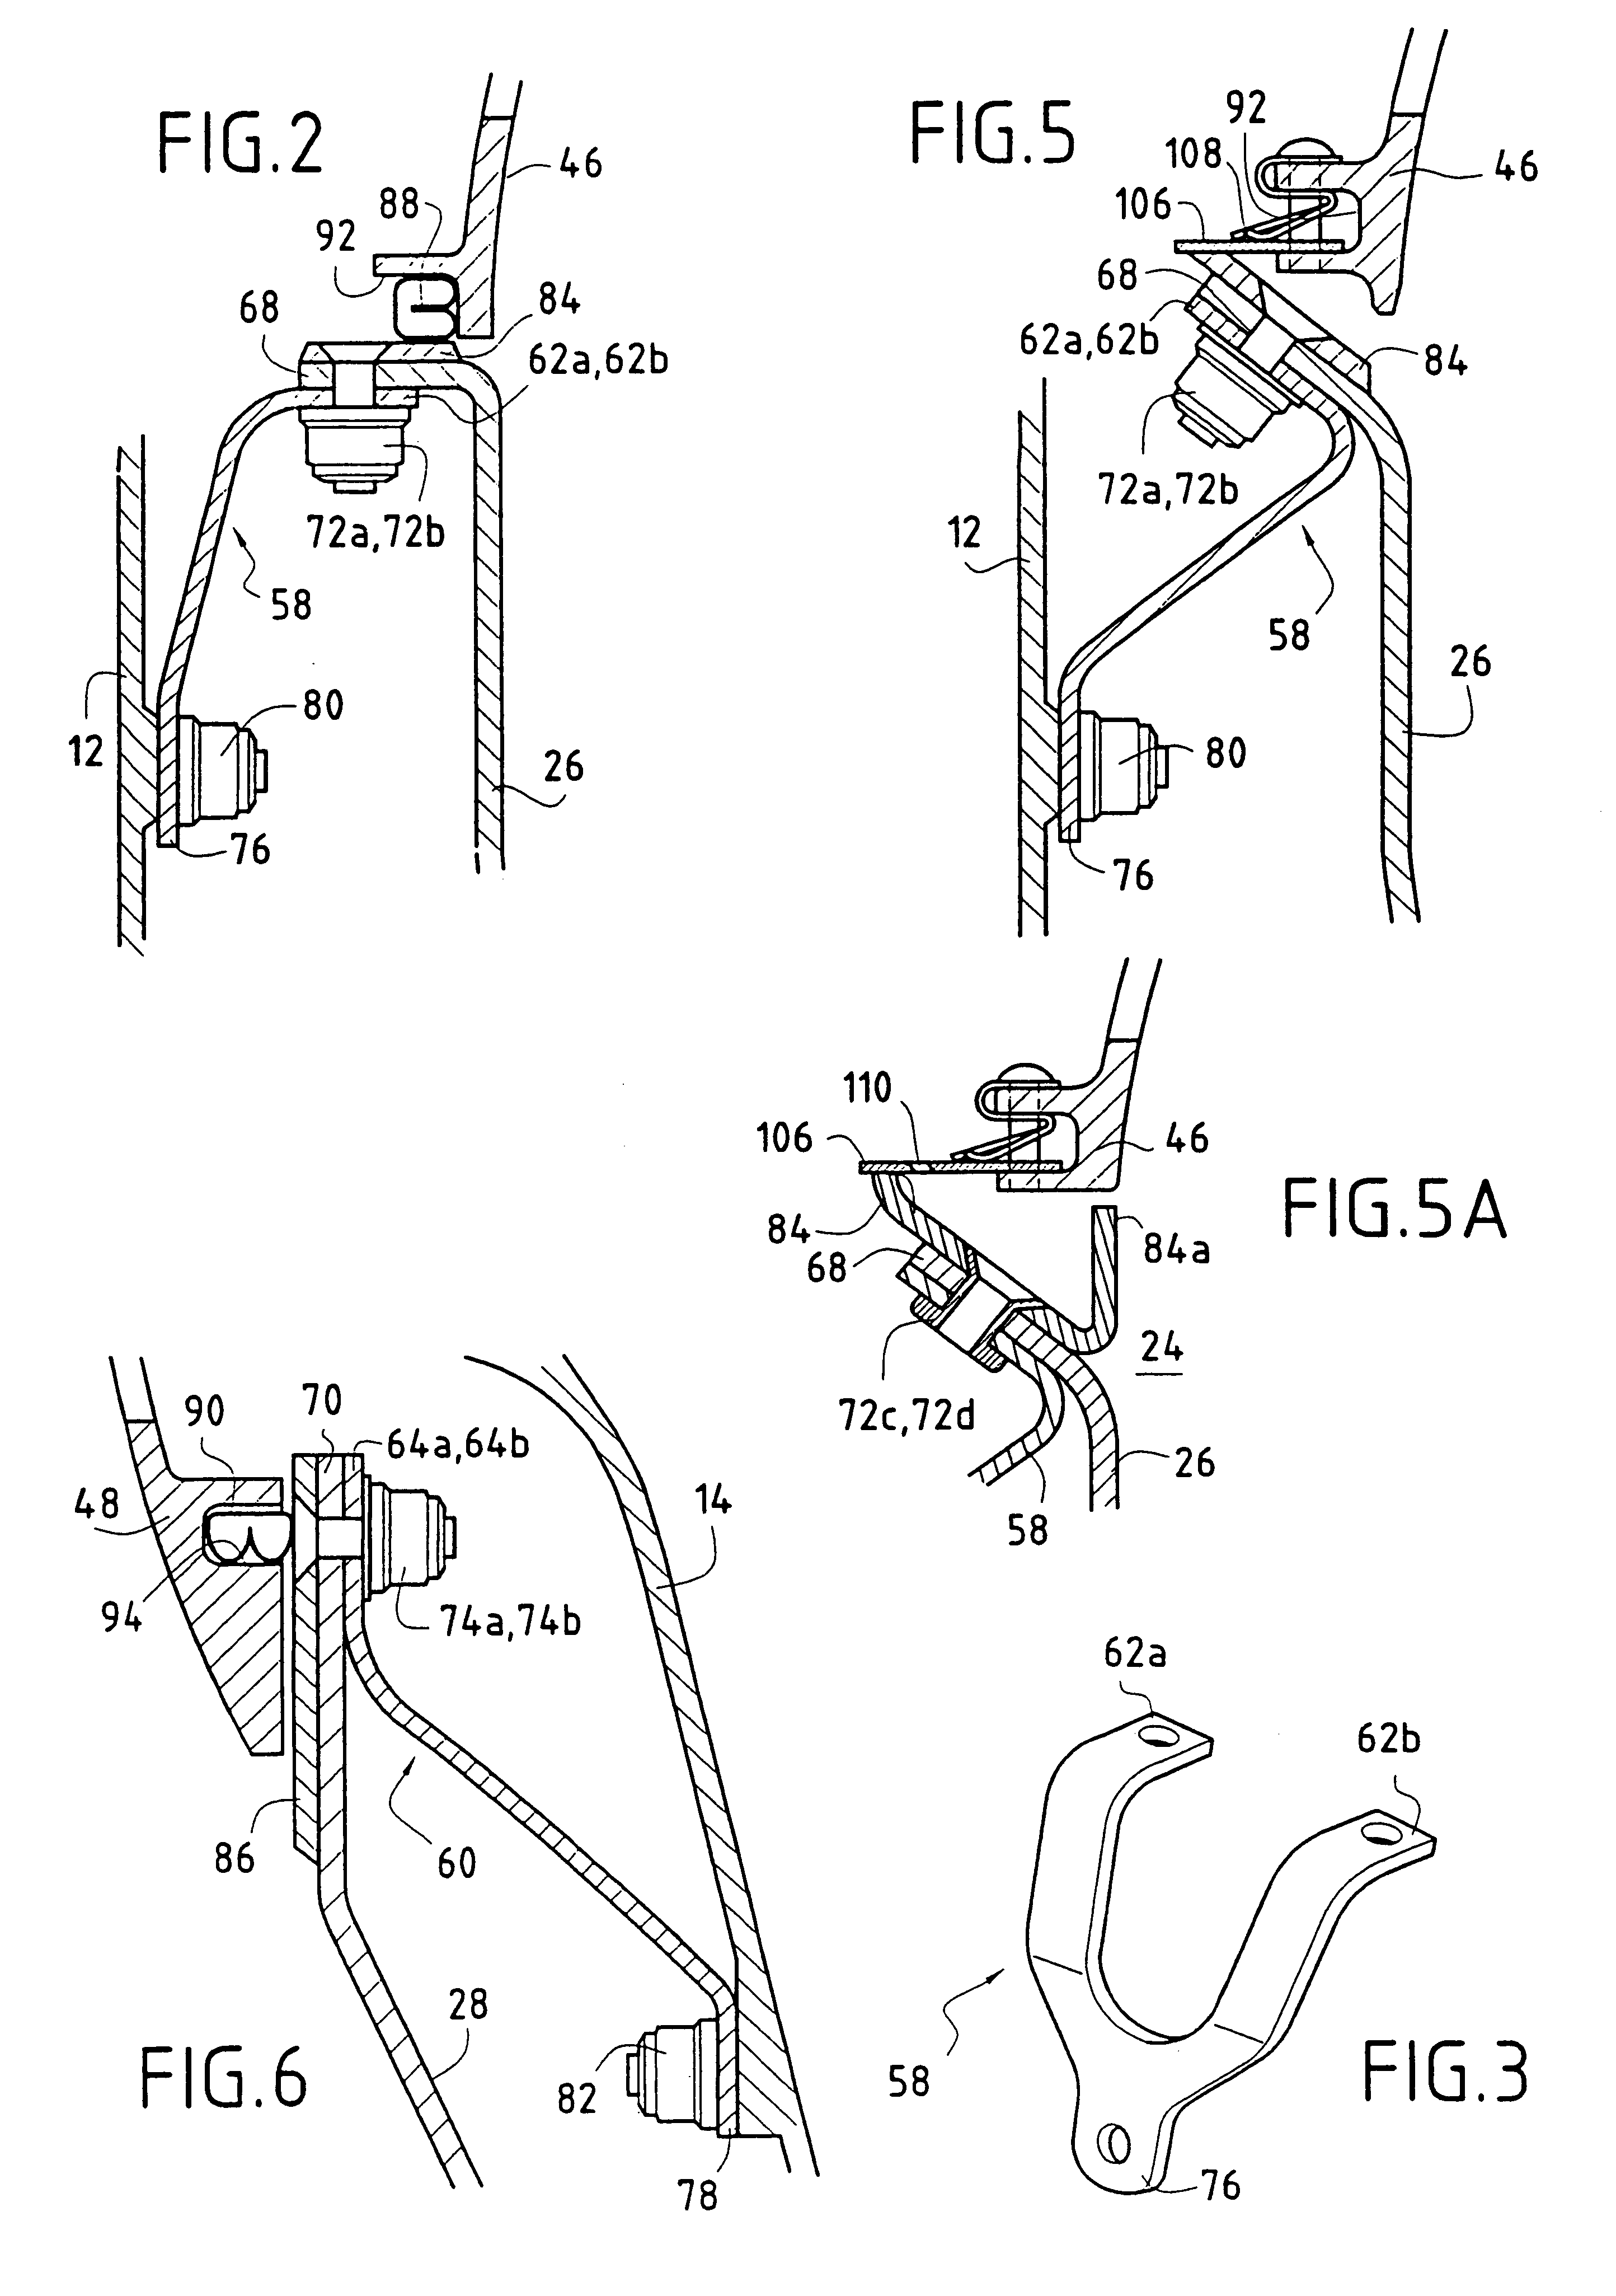 Resilient mount for a CMC combustion chamber of a turbomachine in a metal casing